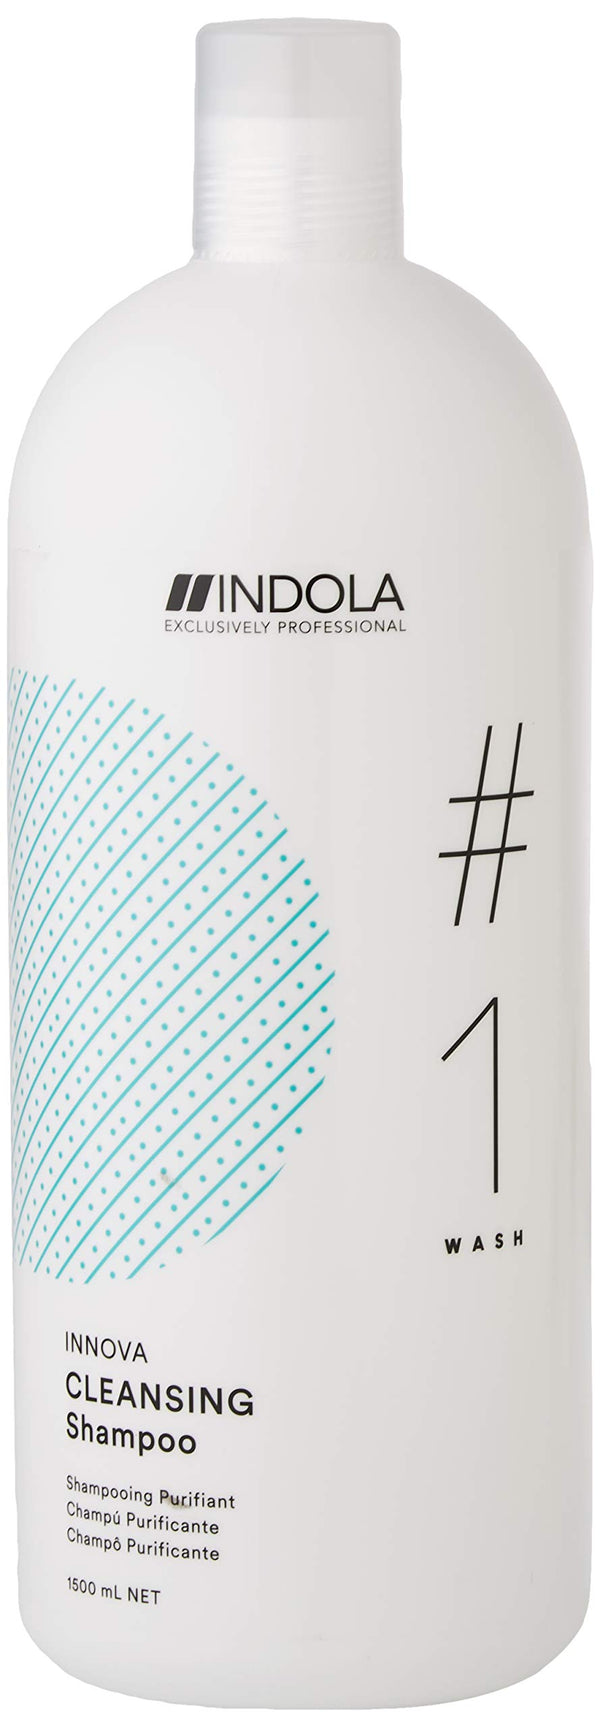 Indola Innova Wash Cleansing Shampoo for all Hair Types, Number 1, 1500 ml